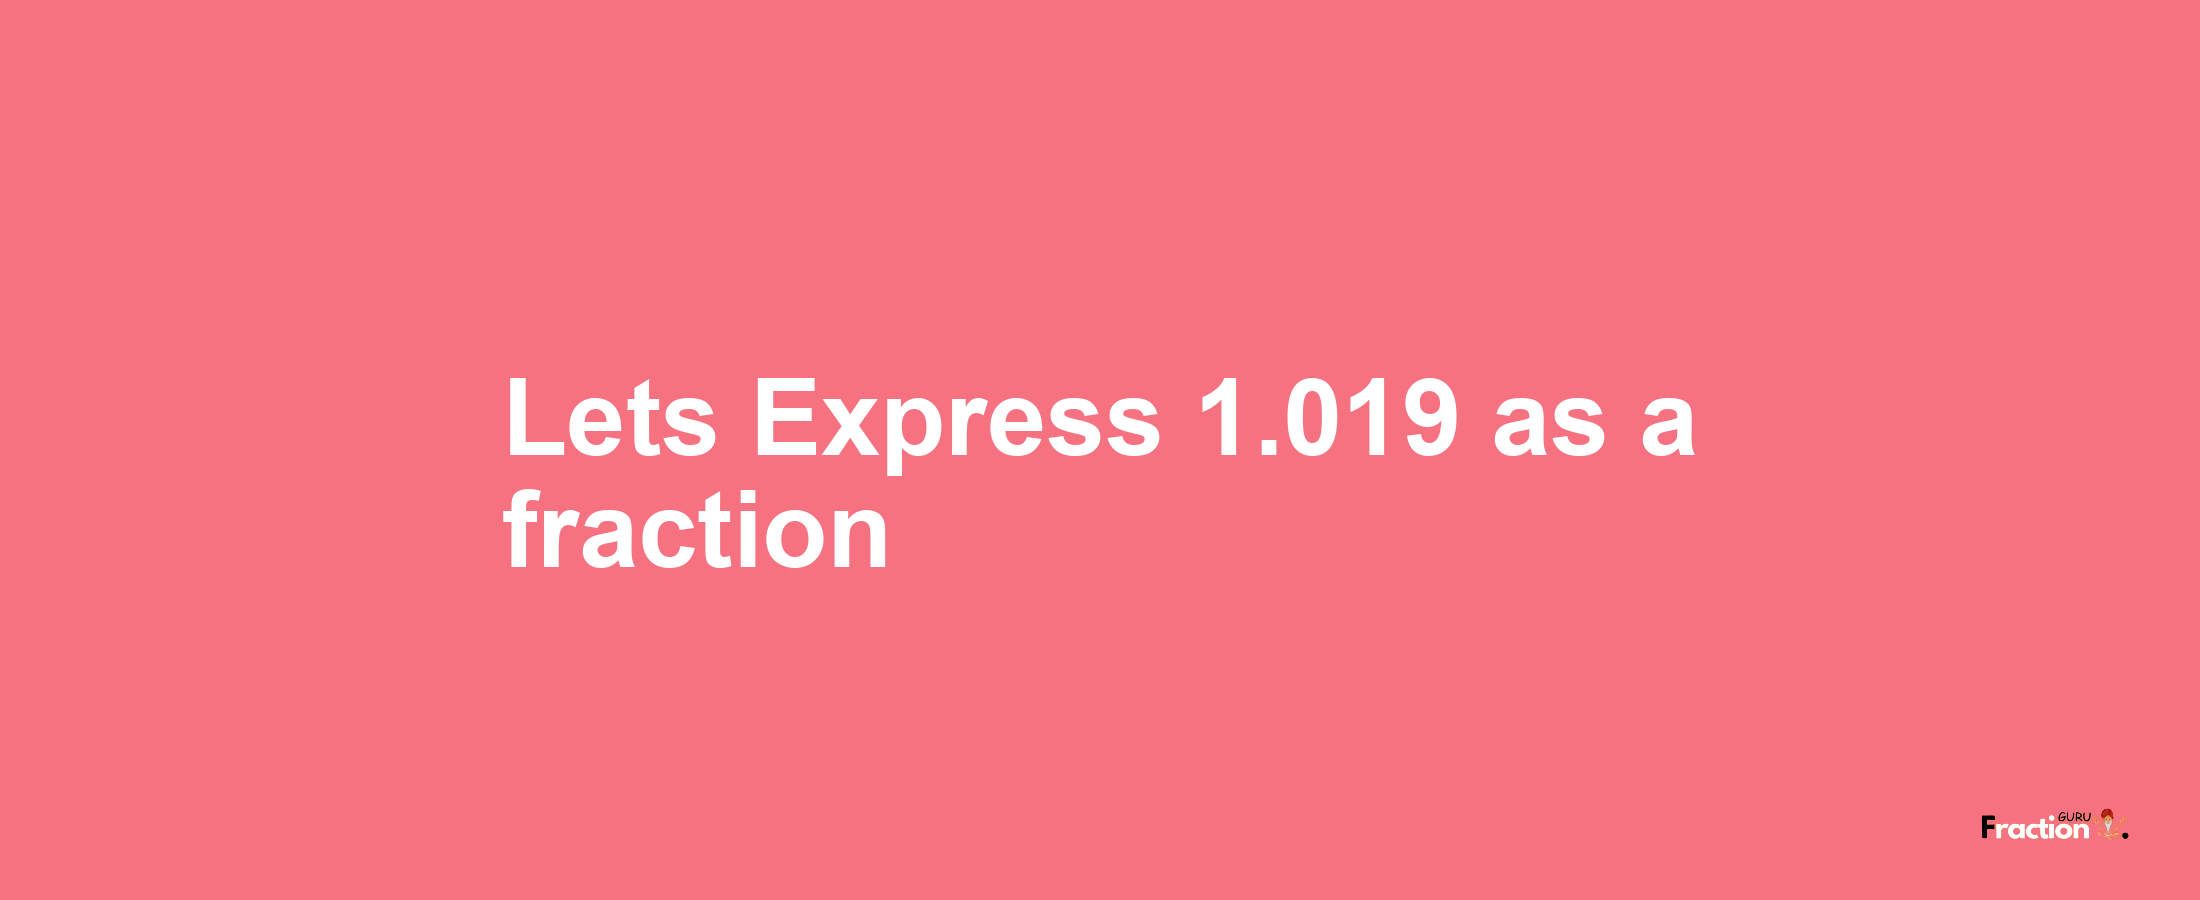 Lets Express 1.019 as afraction